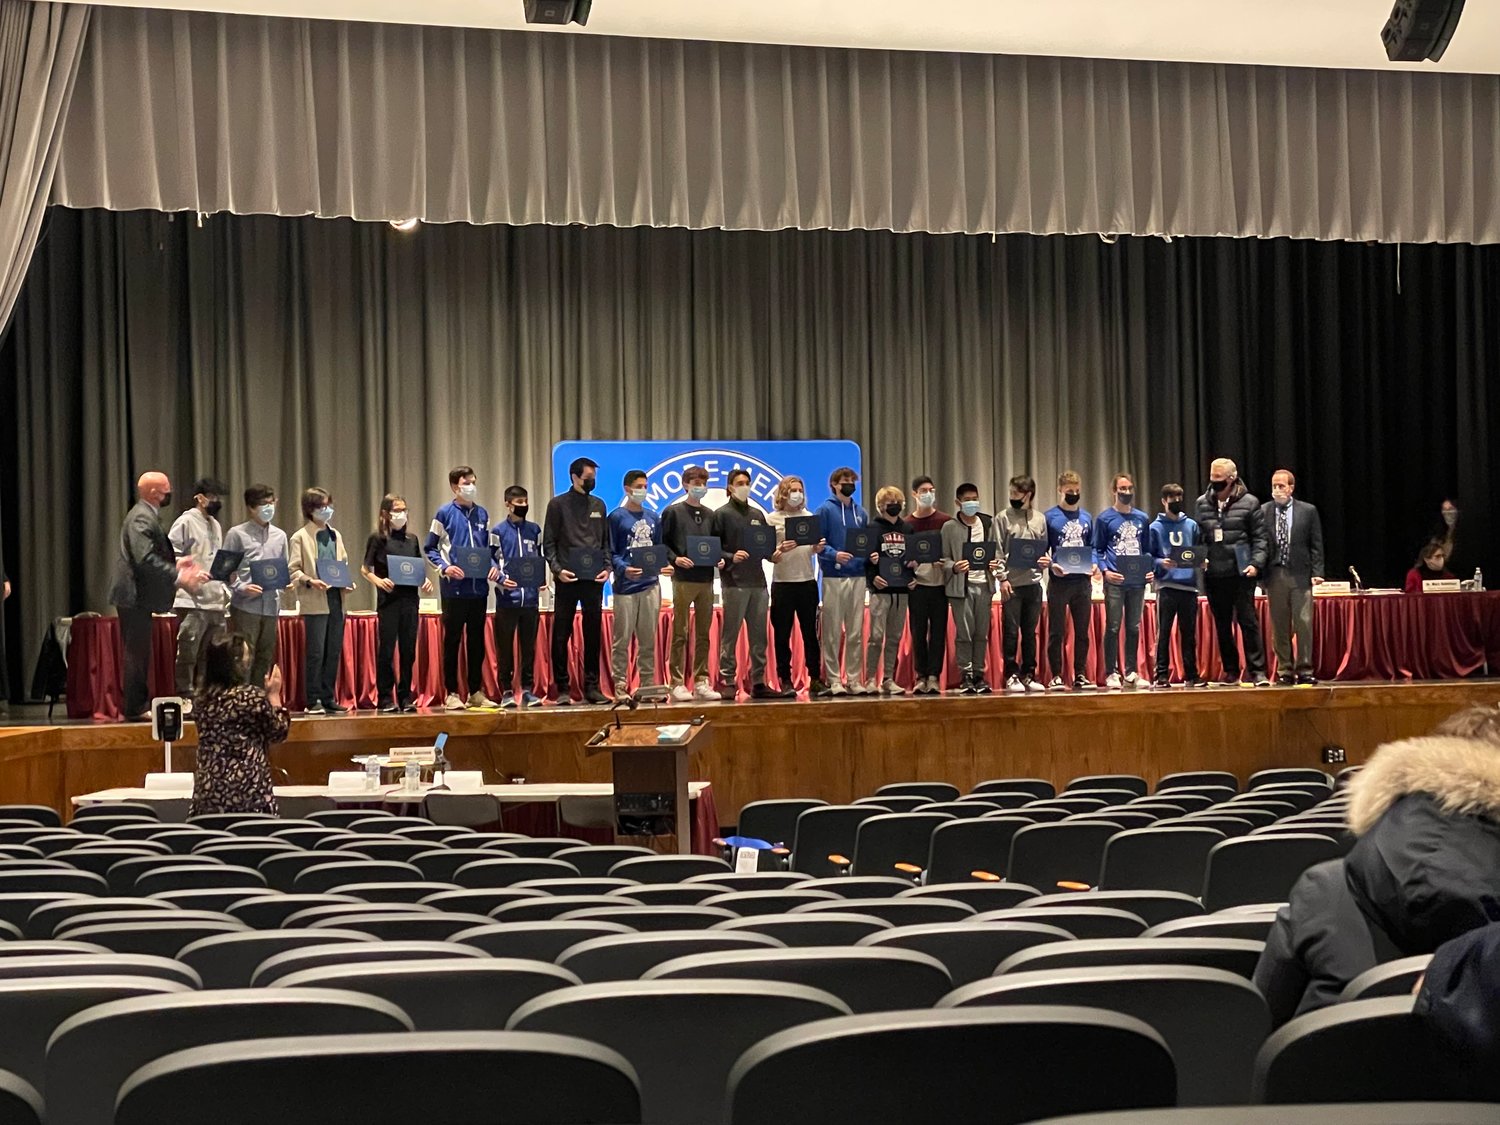 At the Bellmore-Merrick Central High School District meeting on Dec. 1, the Calhoun High School boy’s cross-country team was honored, having won both the county championship and state qualifier meets.